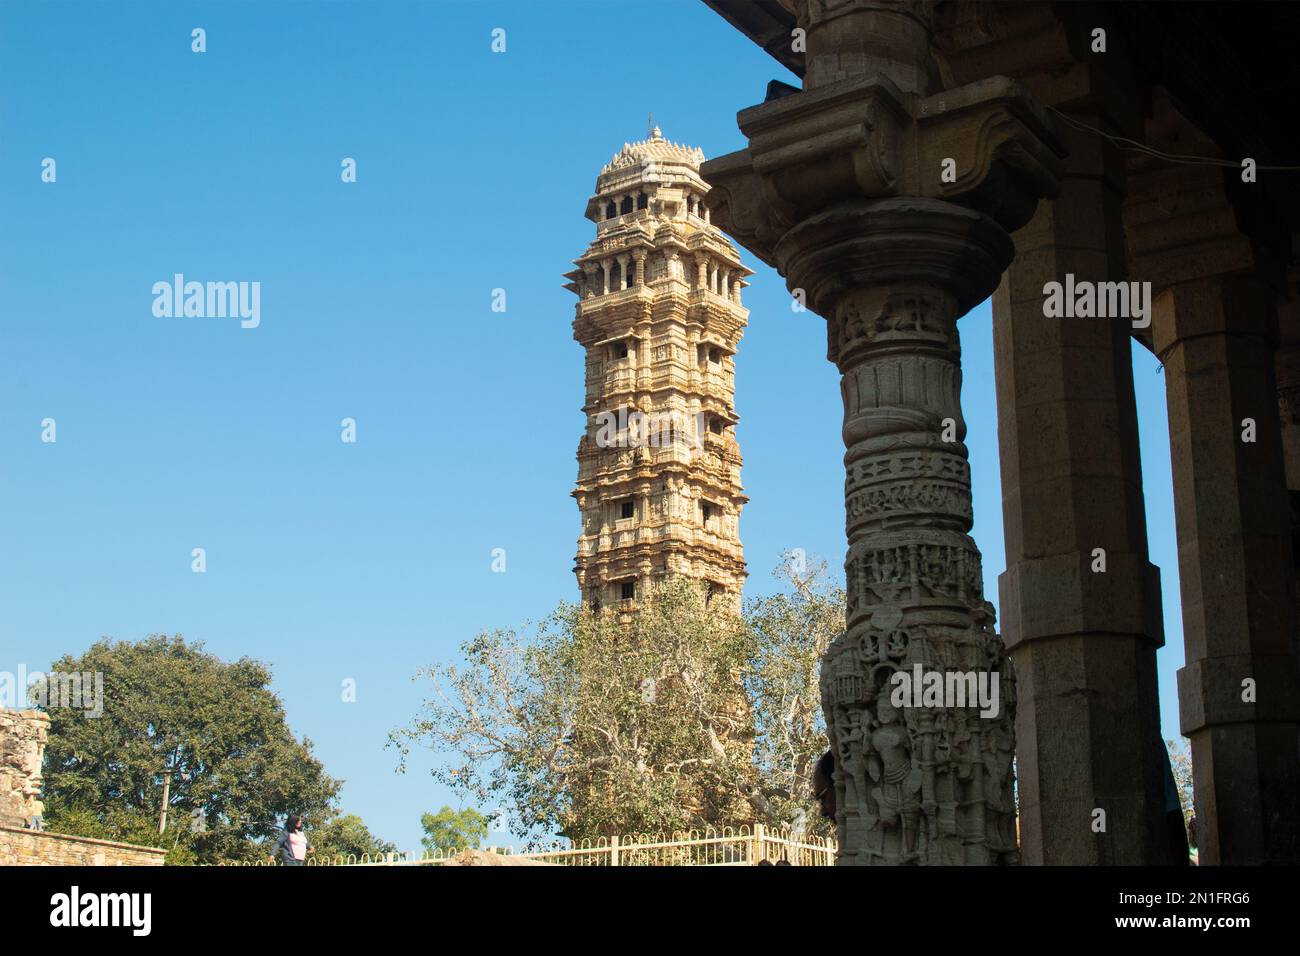 Victory tower in Chittor with stone pillar in foreground Stock Photo